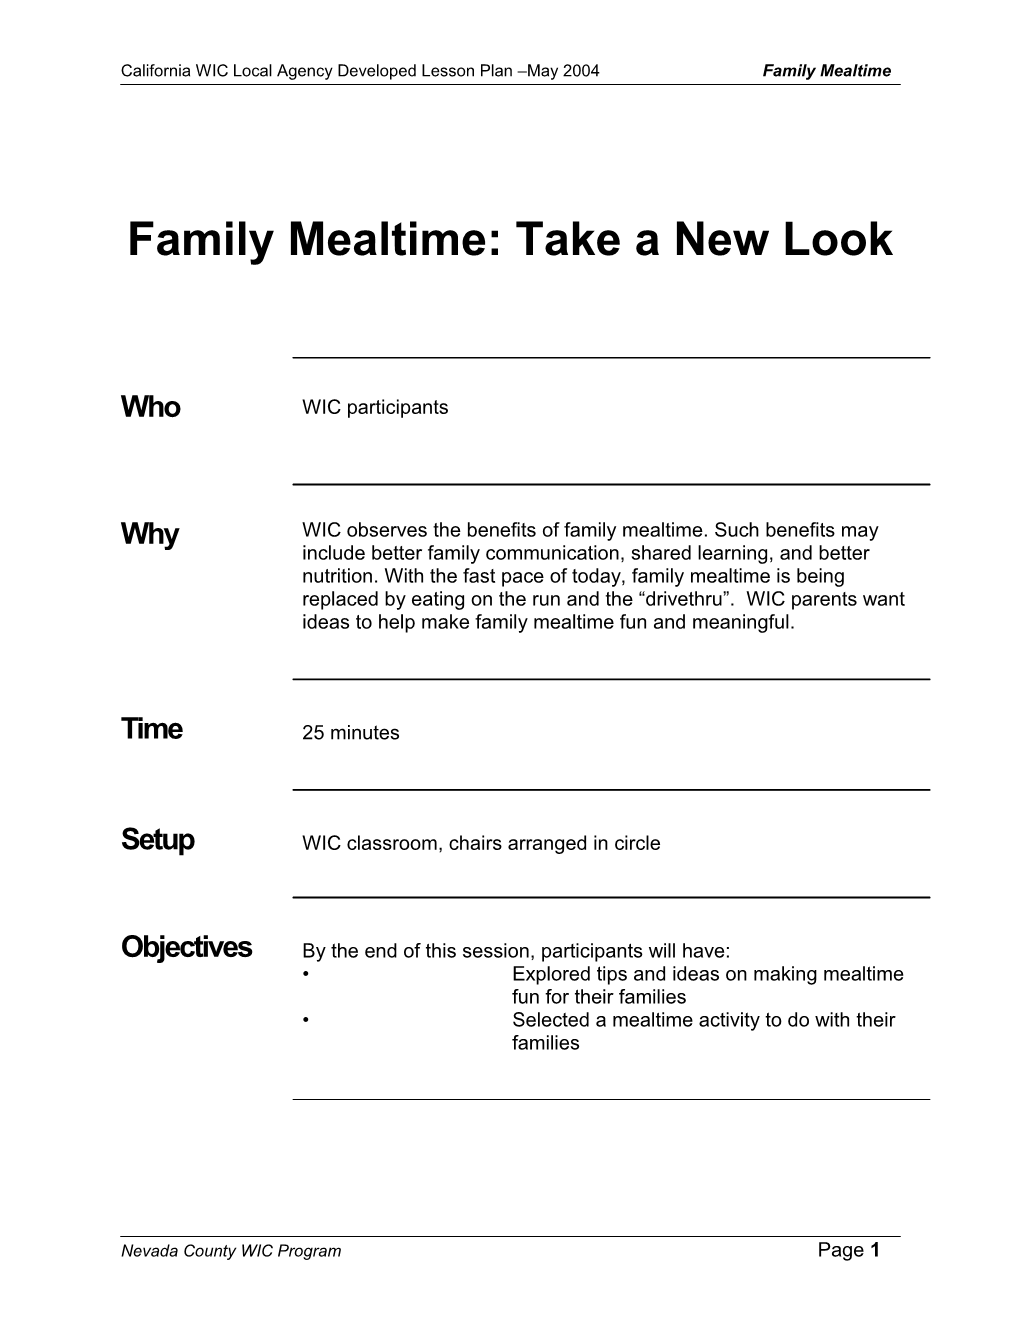 Family Mealtime: Take a New Look